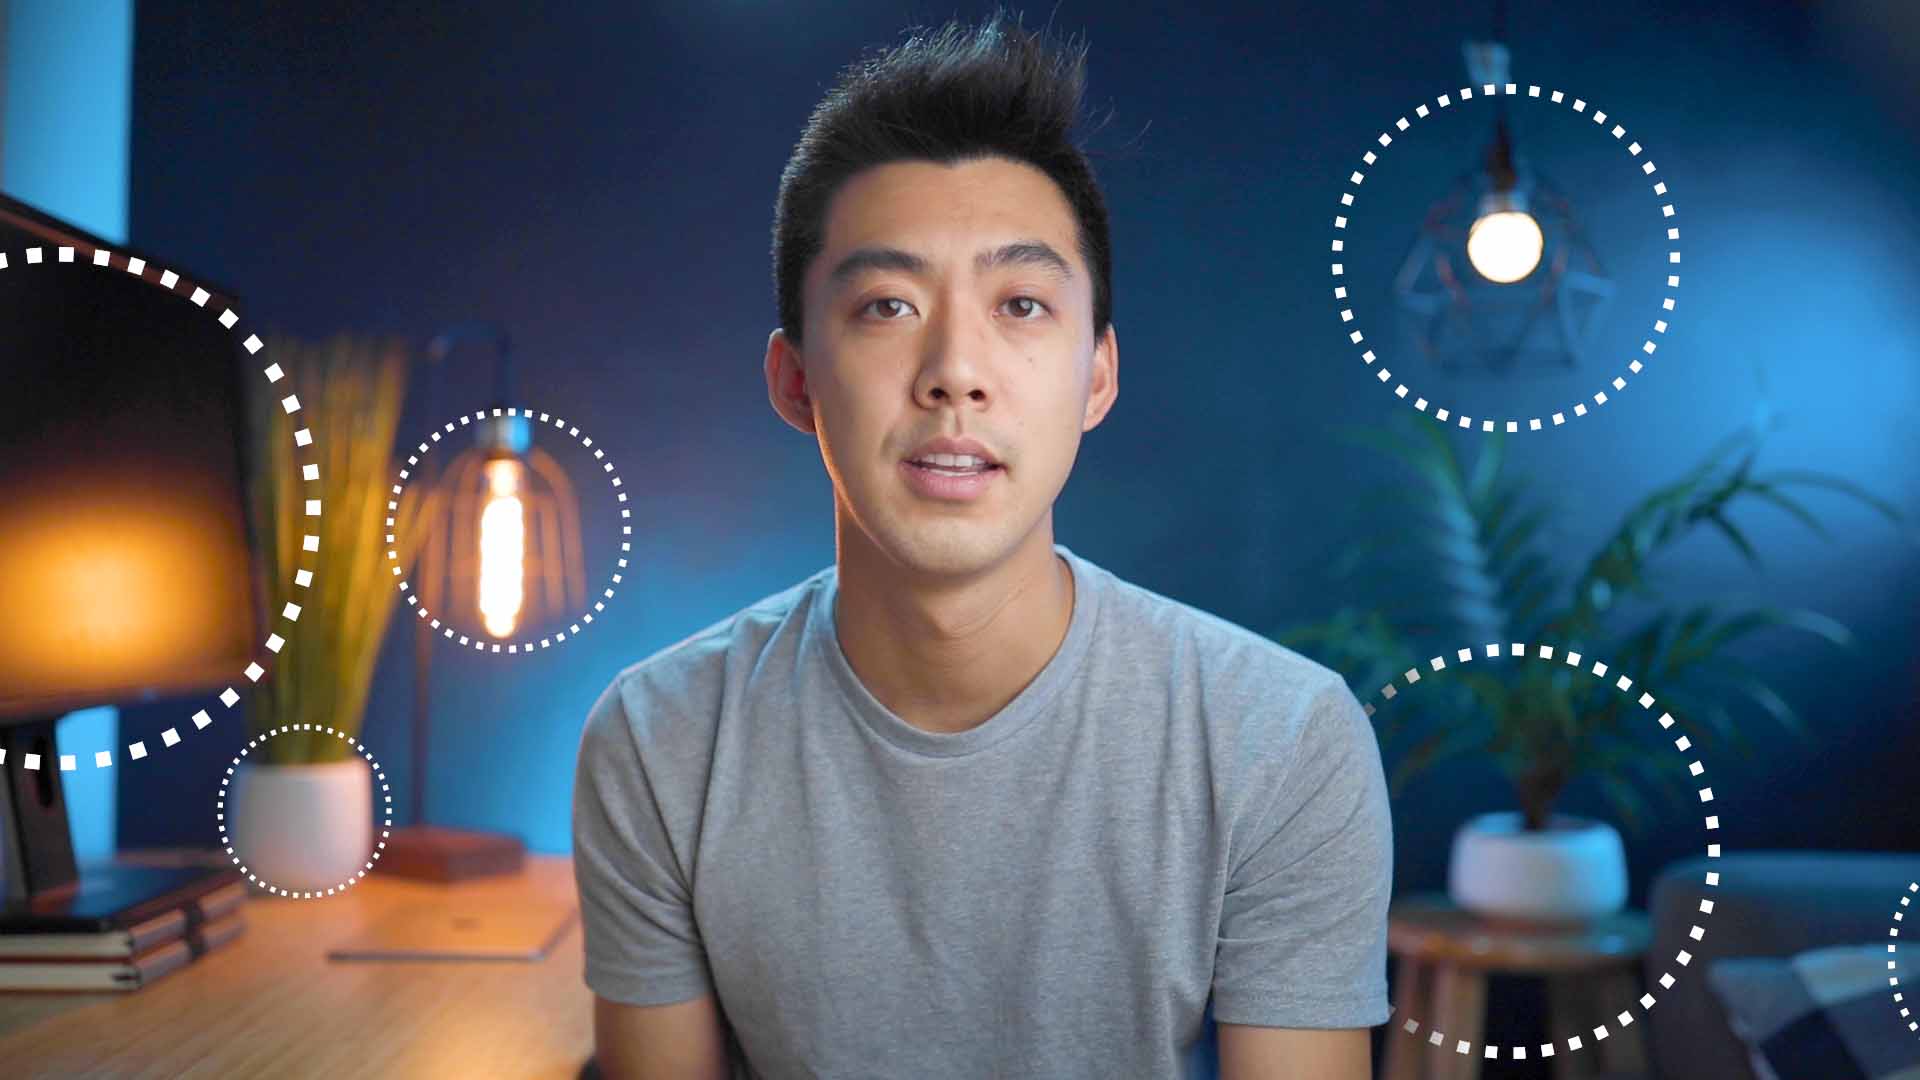 Dream Studio Course By Kevin Shen - Free Download - Make Your Home Video Setup Look Like Hollywood